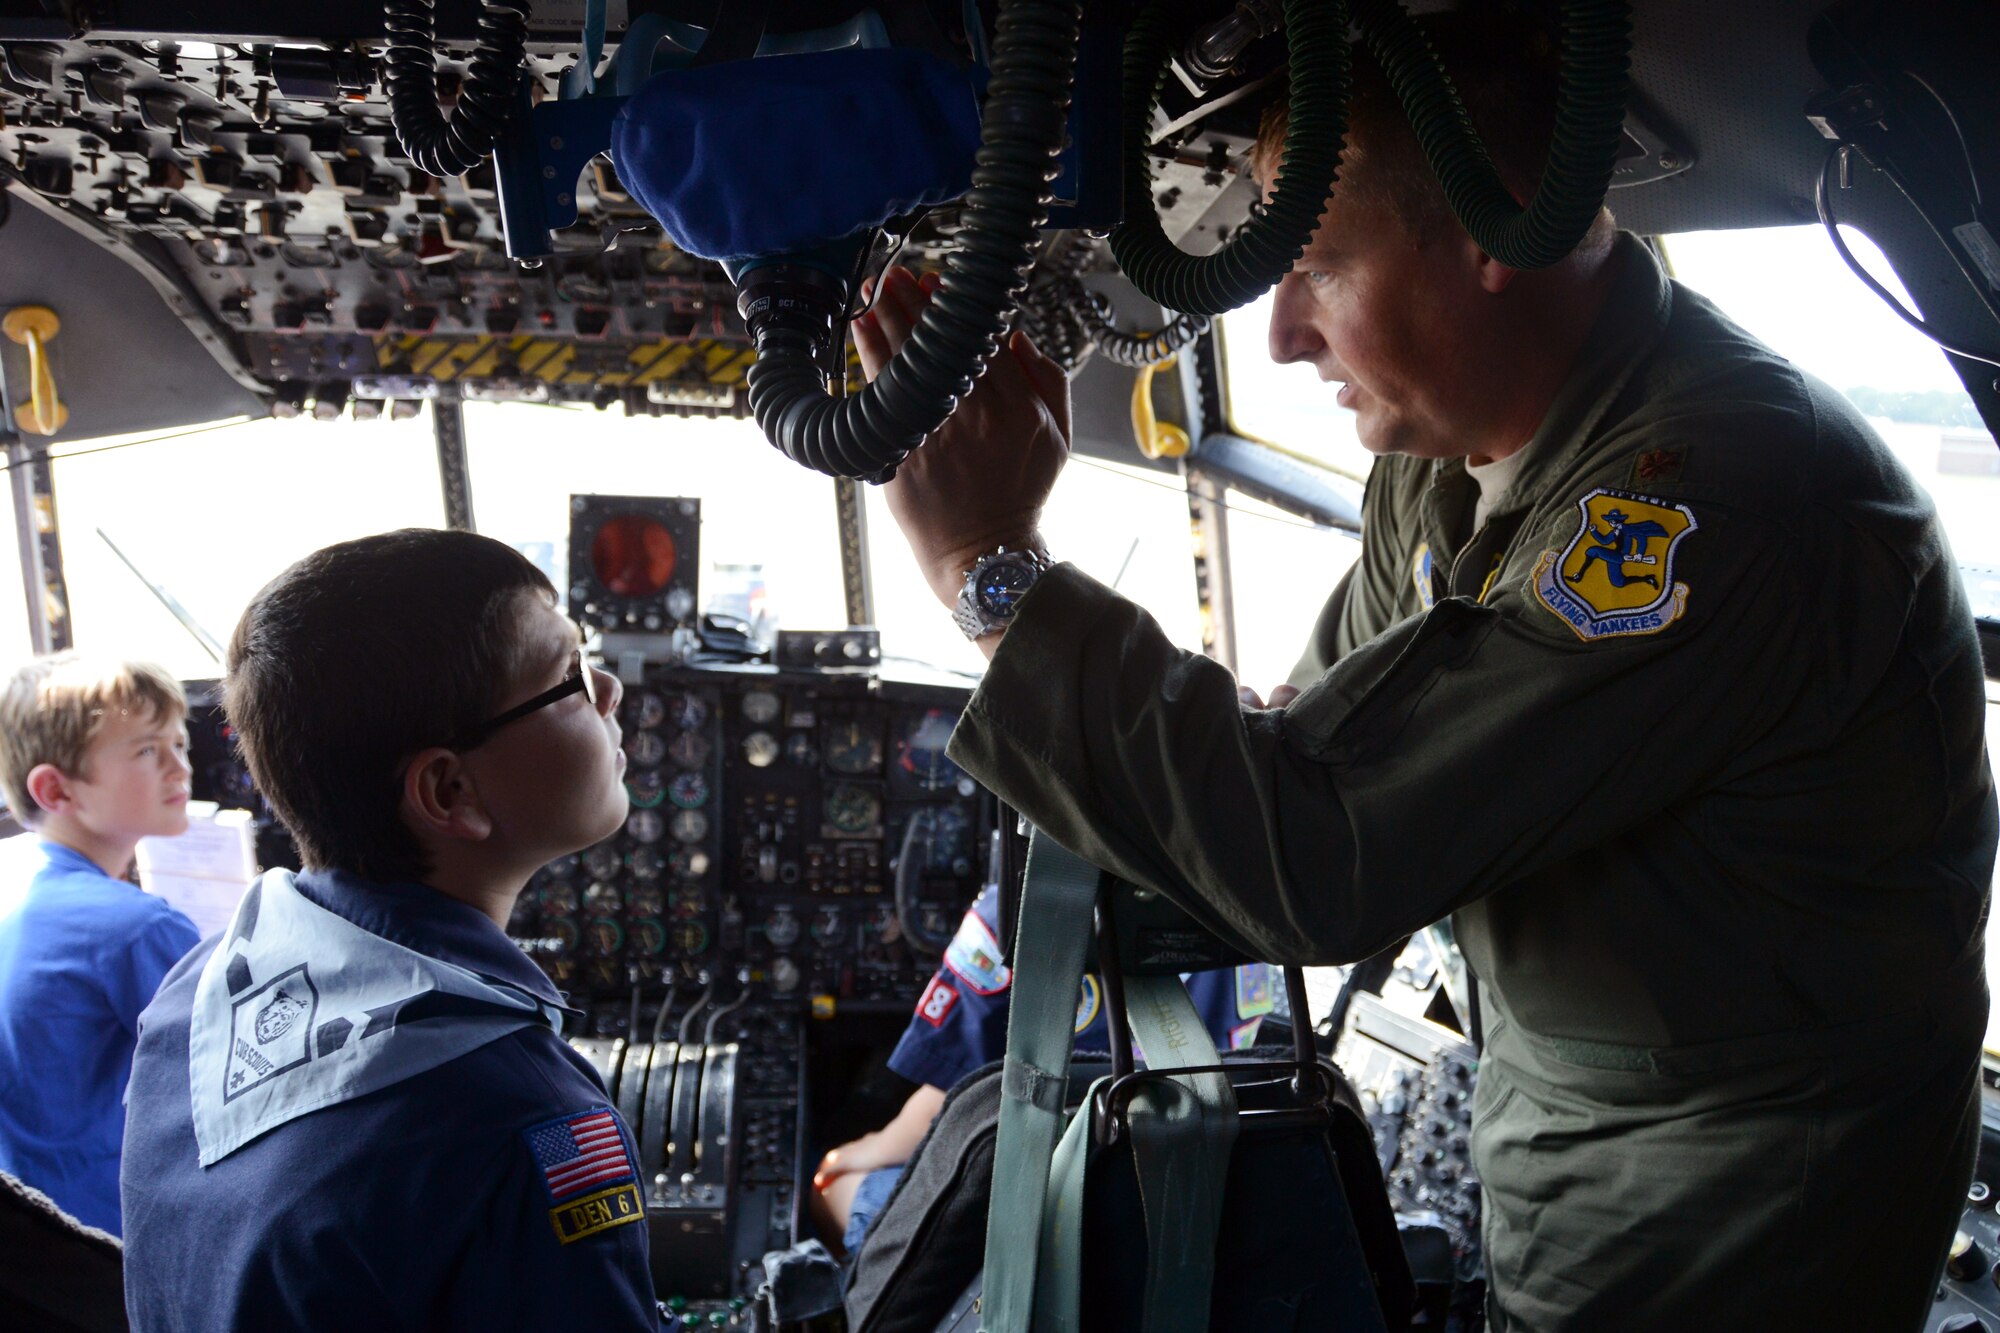 Maj. Kevin Eikleberry, pilot for the 118th Airlift Squadron, explains the various functions of the C-130H aircraft controls to a very intent Anthony Maio, 9, as Blake Kamoen, 8, listens in. Behind Eikleberry in the co-pilot seat is Tristan Schemmerling, 8. All three of the children are part of Cub Scout Troop 18 and came to the Bradley Air National Guard Base, East Granby, Conn., Aug. 4, 2014, to take a tour of the unit’s recently assigned aircraft. (U.S. Air National Guard photo by Tech. Sgt. Joshua Mead/Released)